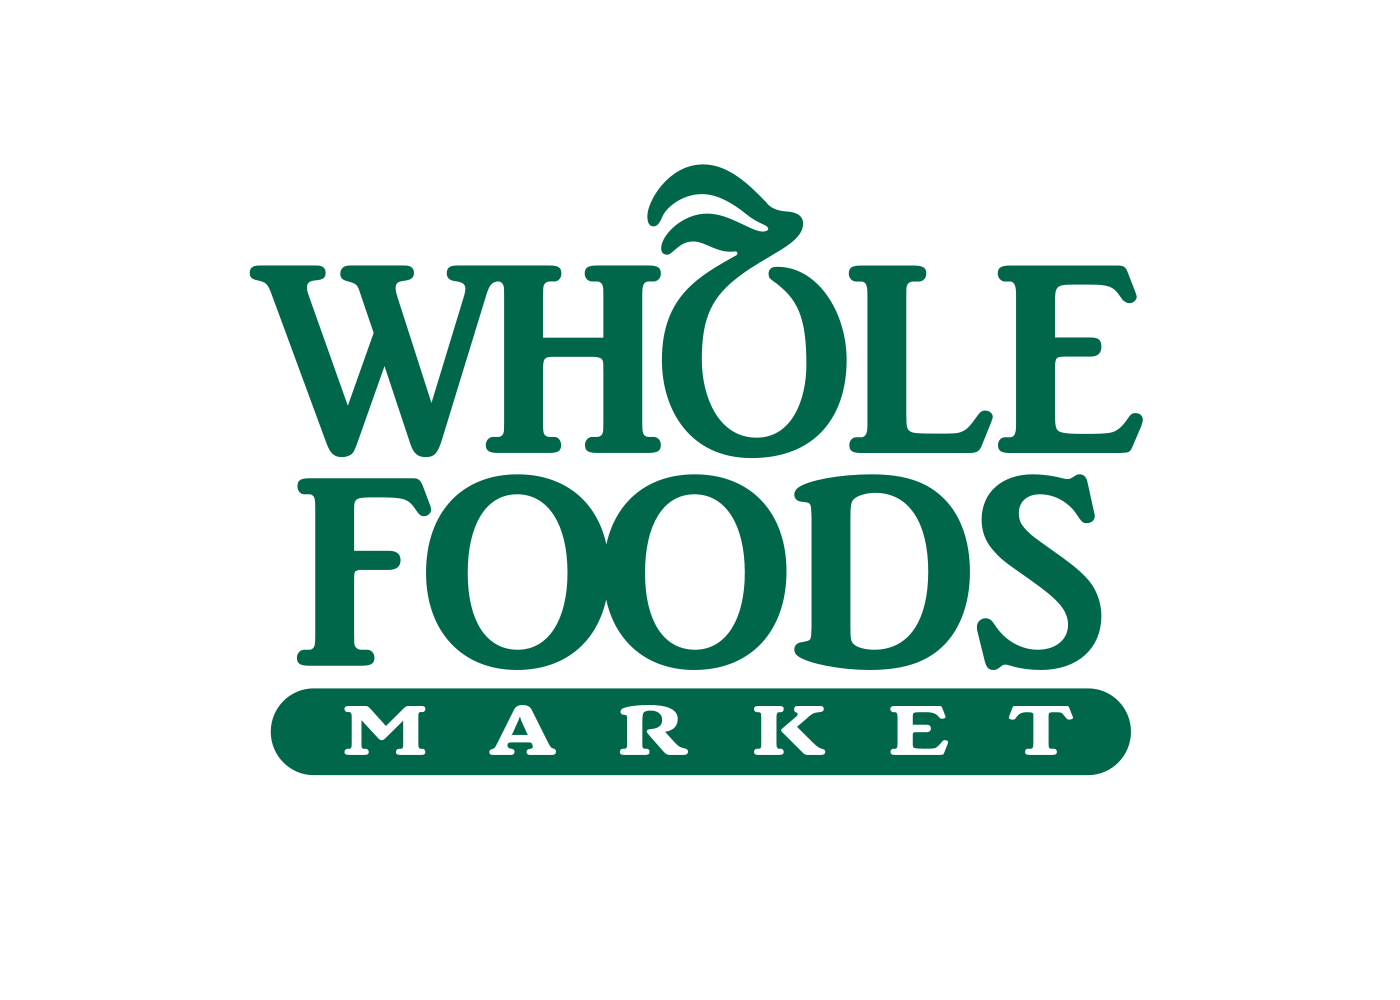 Whole foods Delivery Services